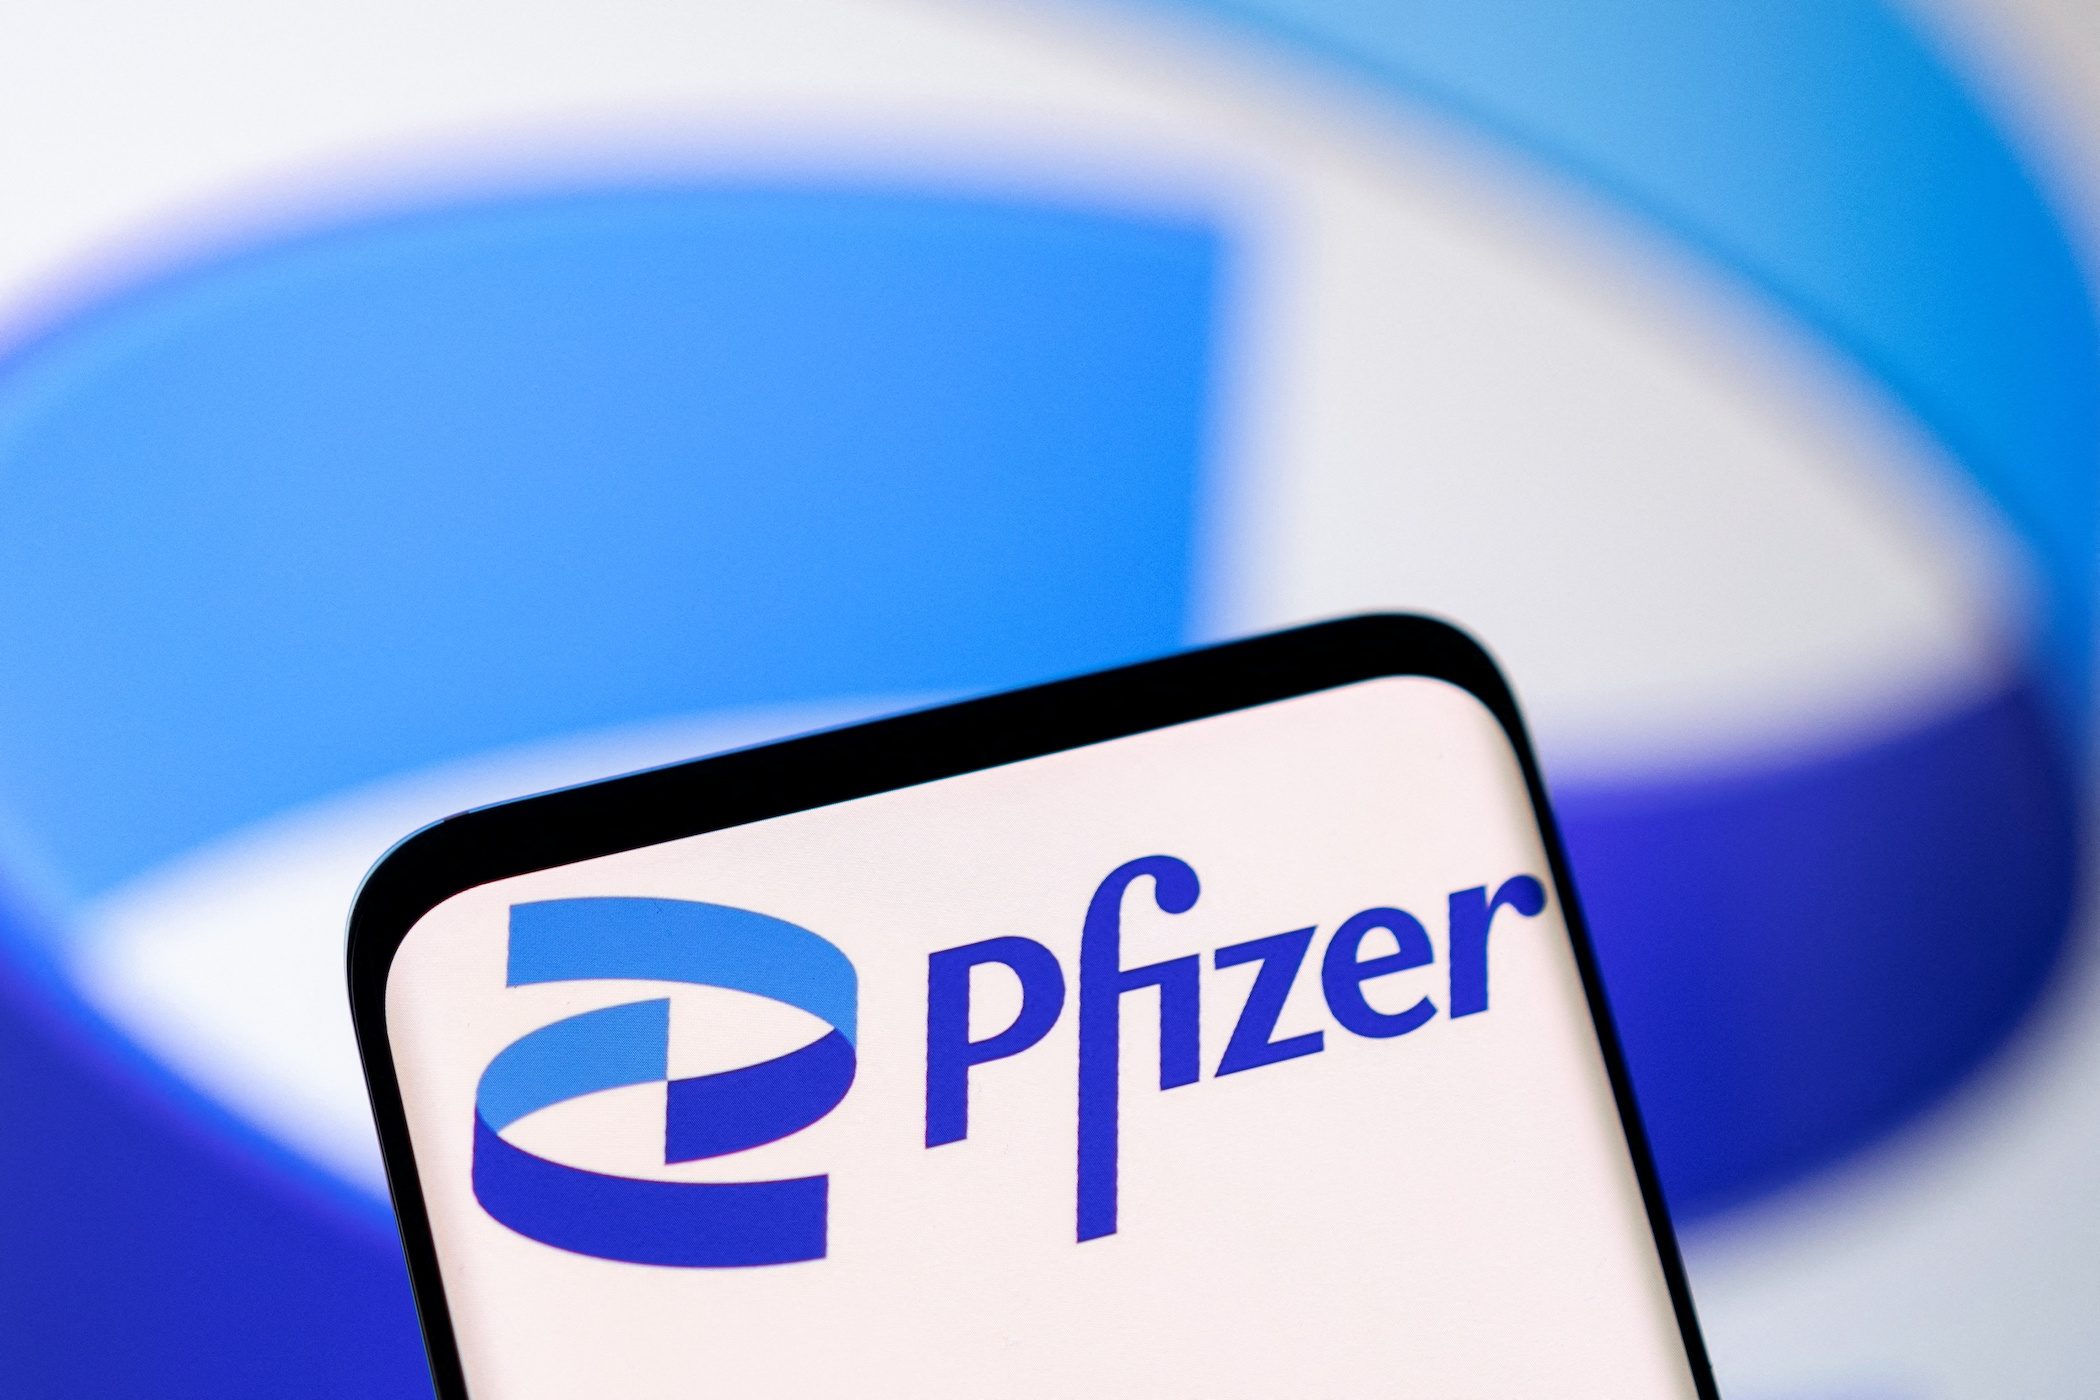 Pfizer keeps COVID-19 sales forecast unchanged as pandemic curbs ease